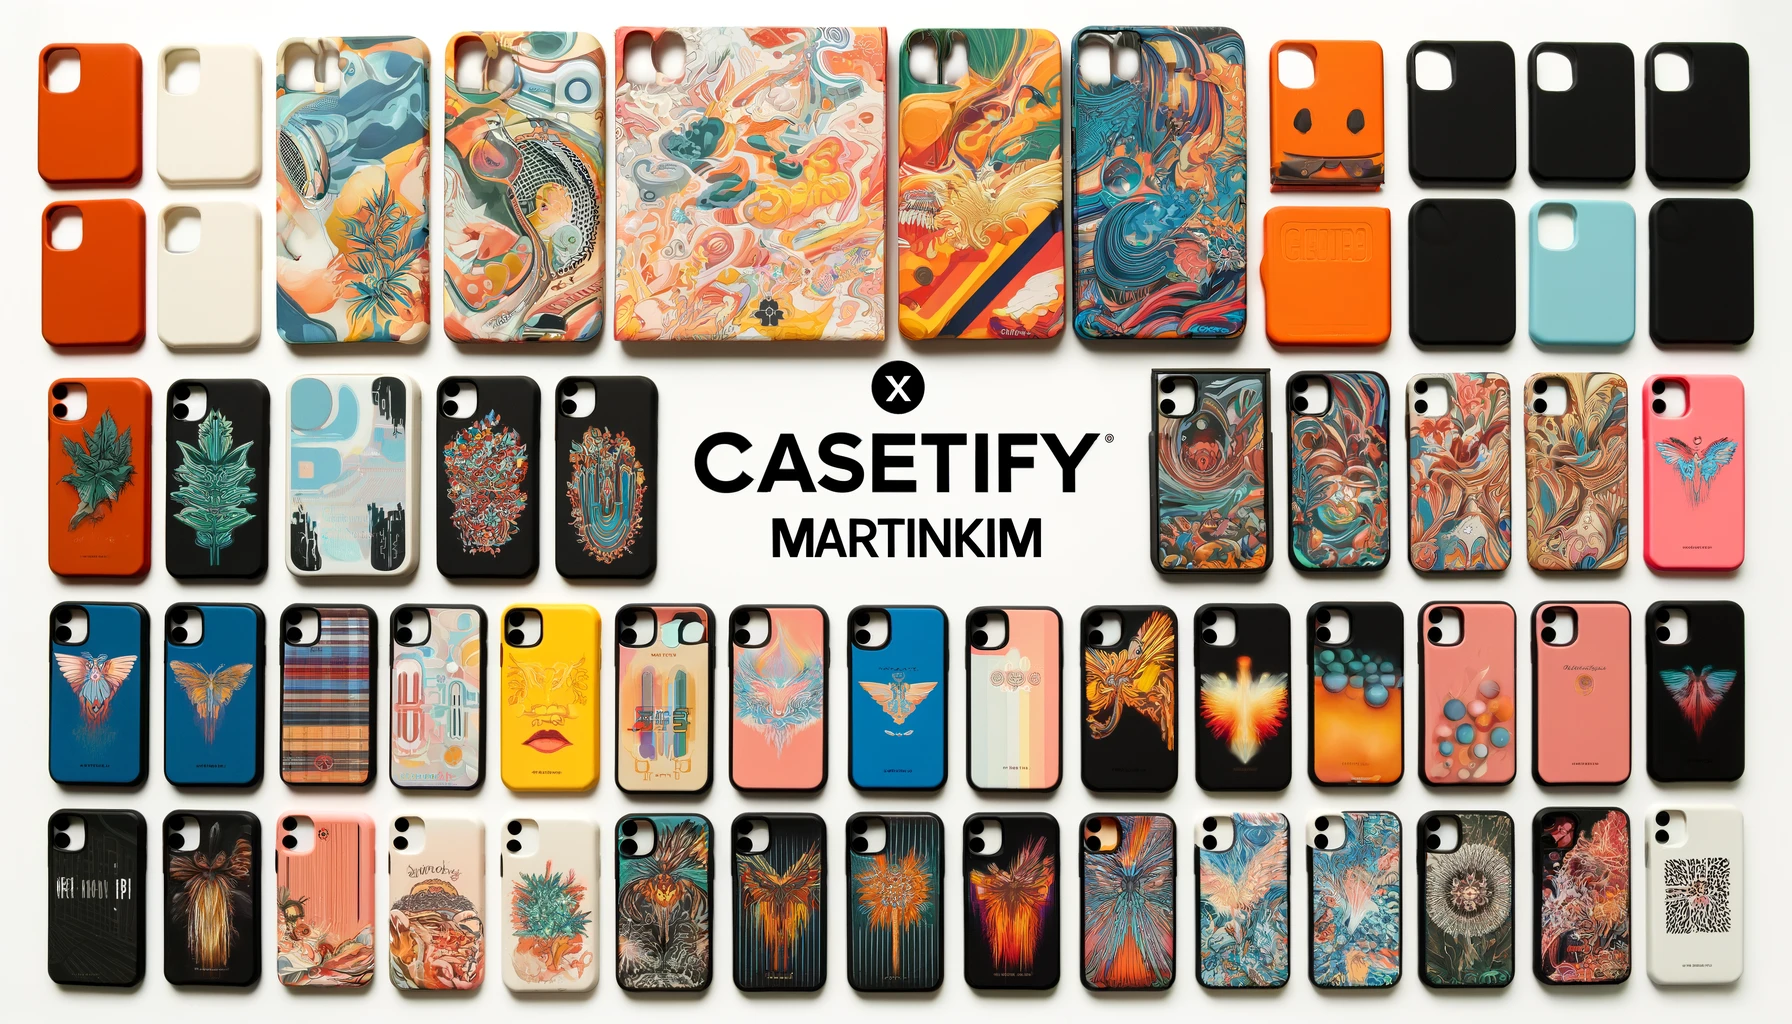 An image displaying the various types of iPhone cases from the CASETiFY x MartinKim collaboration. Show a variety of case designs with vibrant and trendy aesthetics. Include the text 'CASETiFY x MartinKim' prominently in the image.